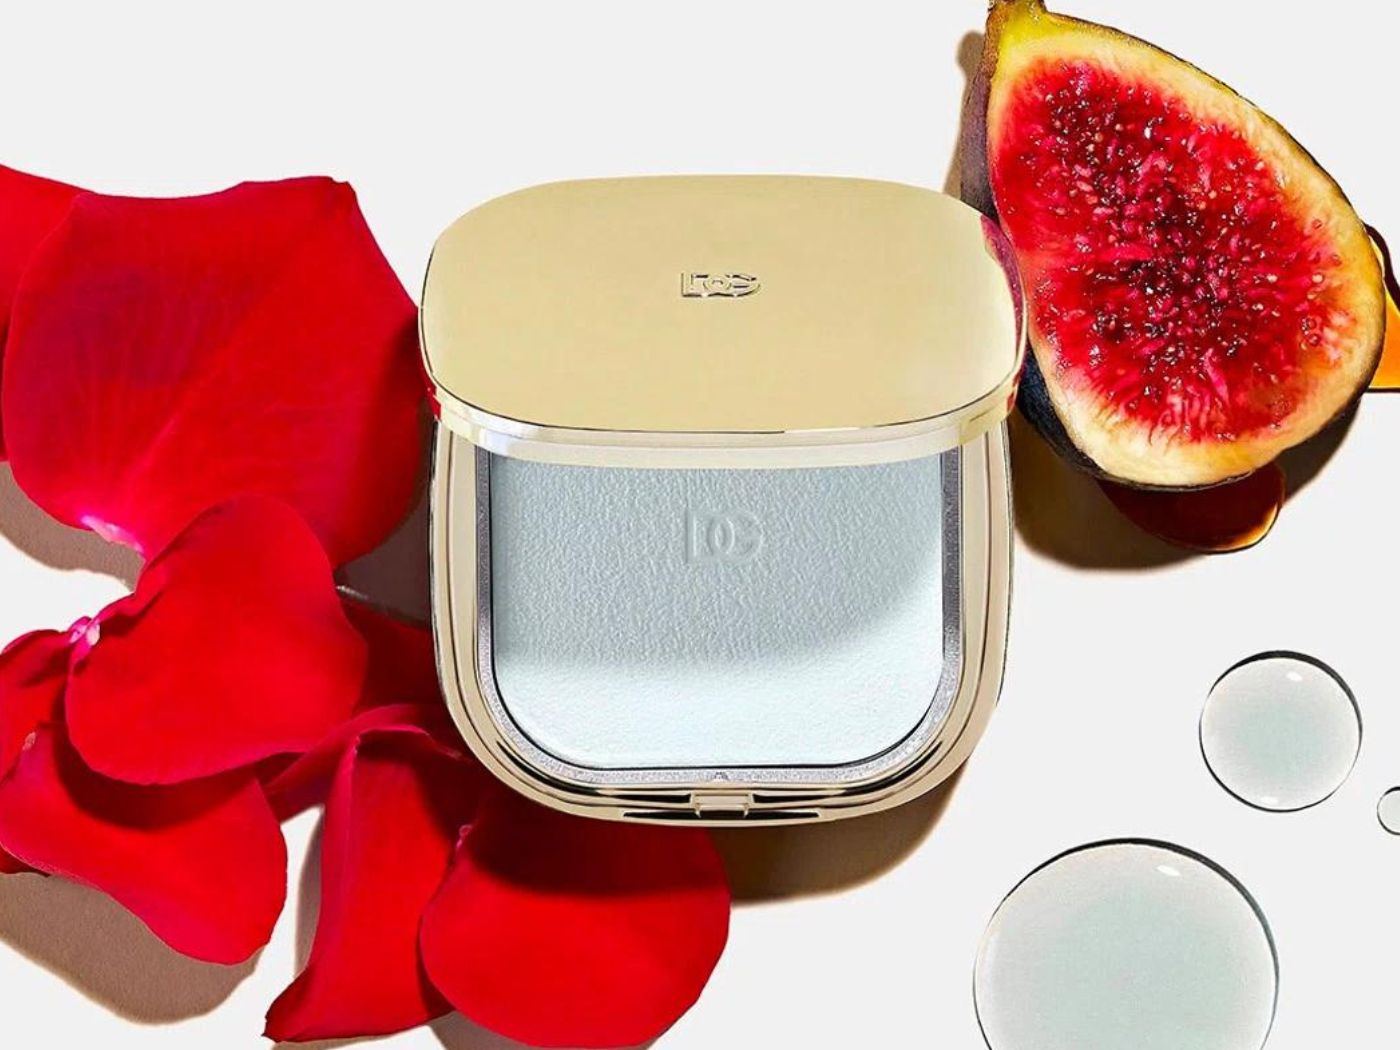 A pale blue eyeshadow compact with gold lid, surrounded by a fig and rose petals